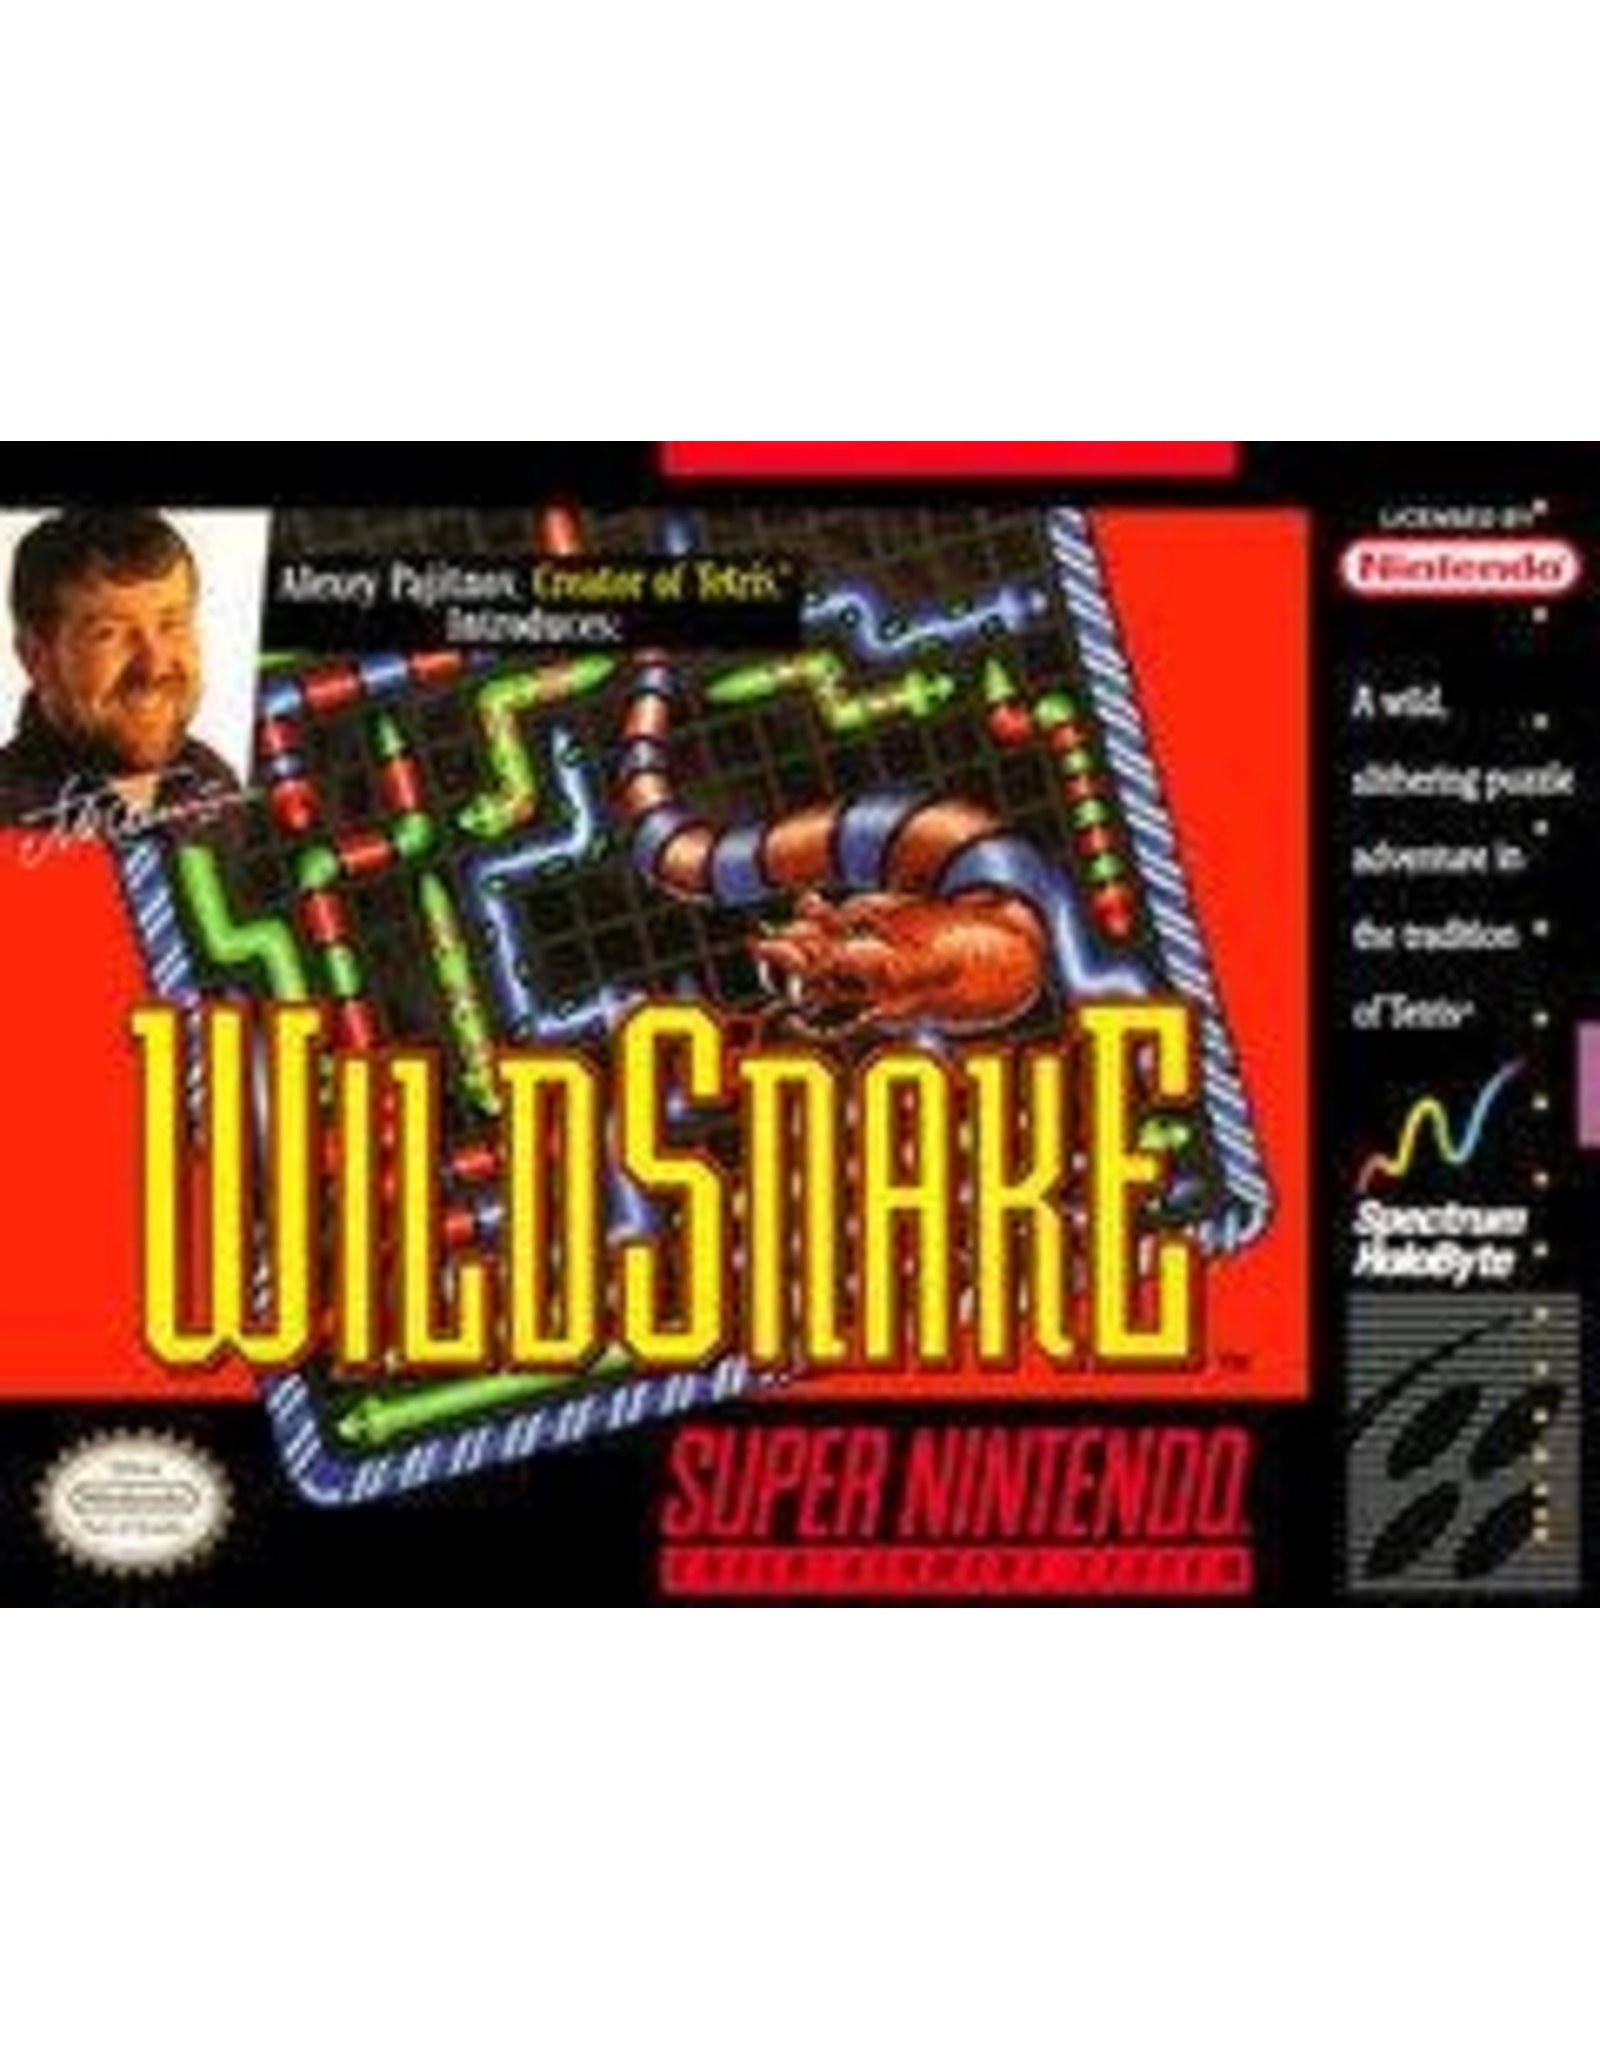 Super Nintendo WildSnake (CiB with Registration Card and Poster)